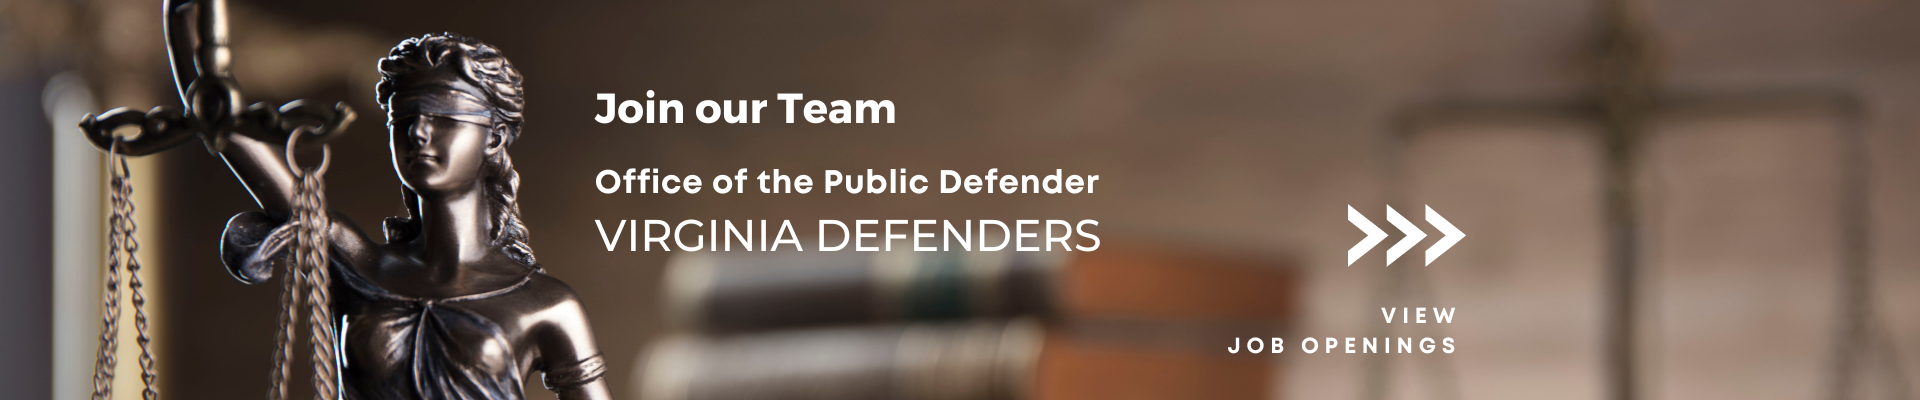 Join our Team - Office of the Public Defender